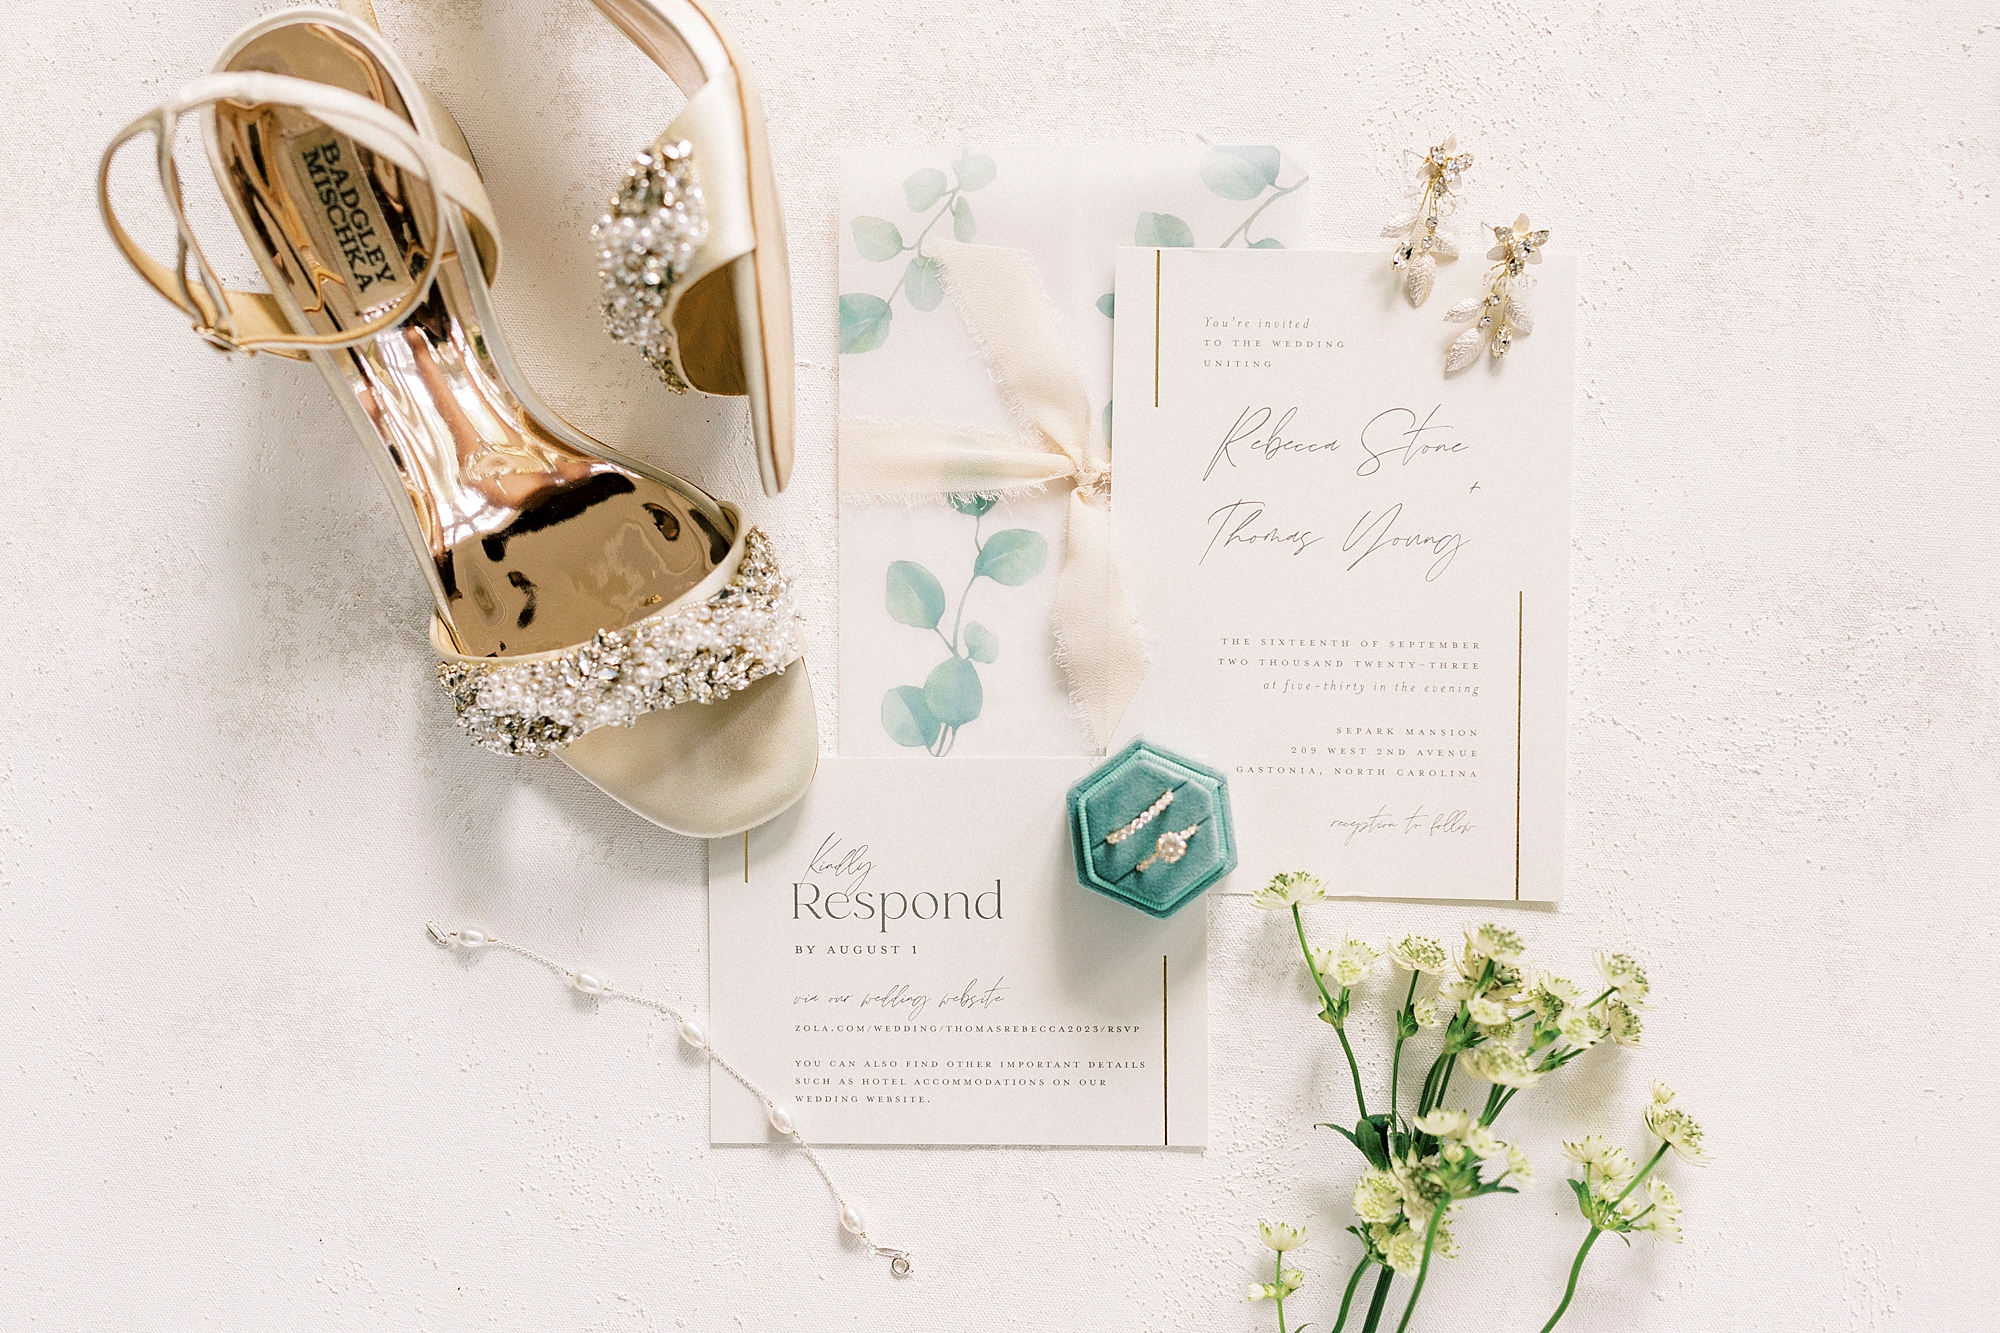 stationery set with bride's shoes and rings in teal ring box